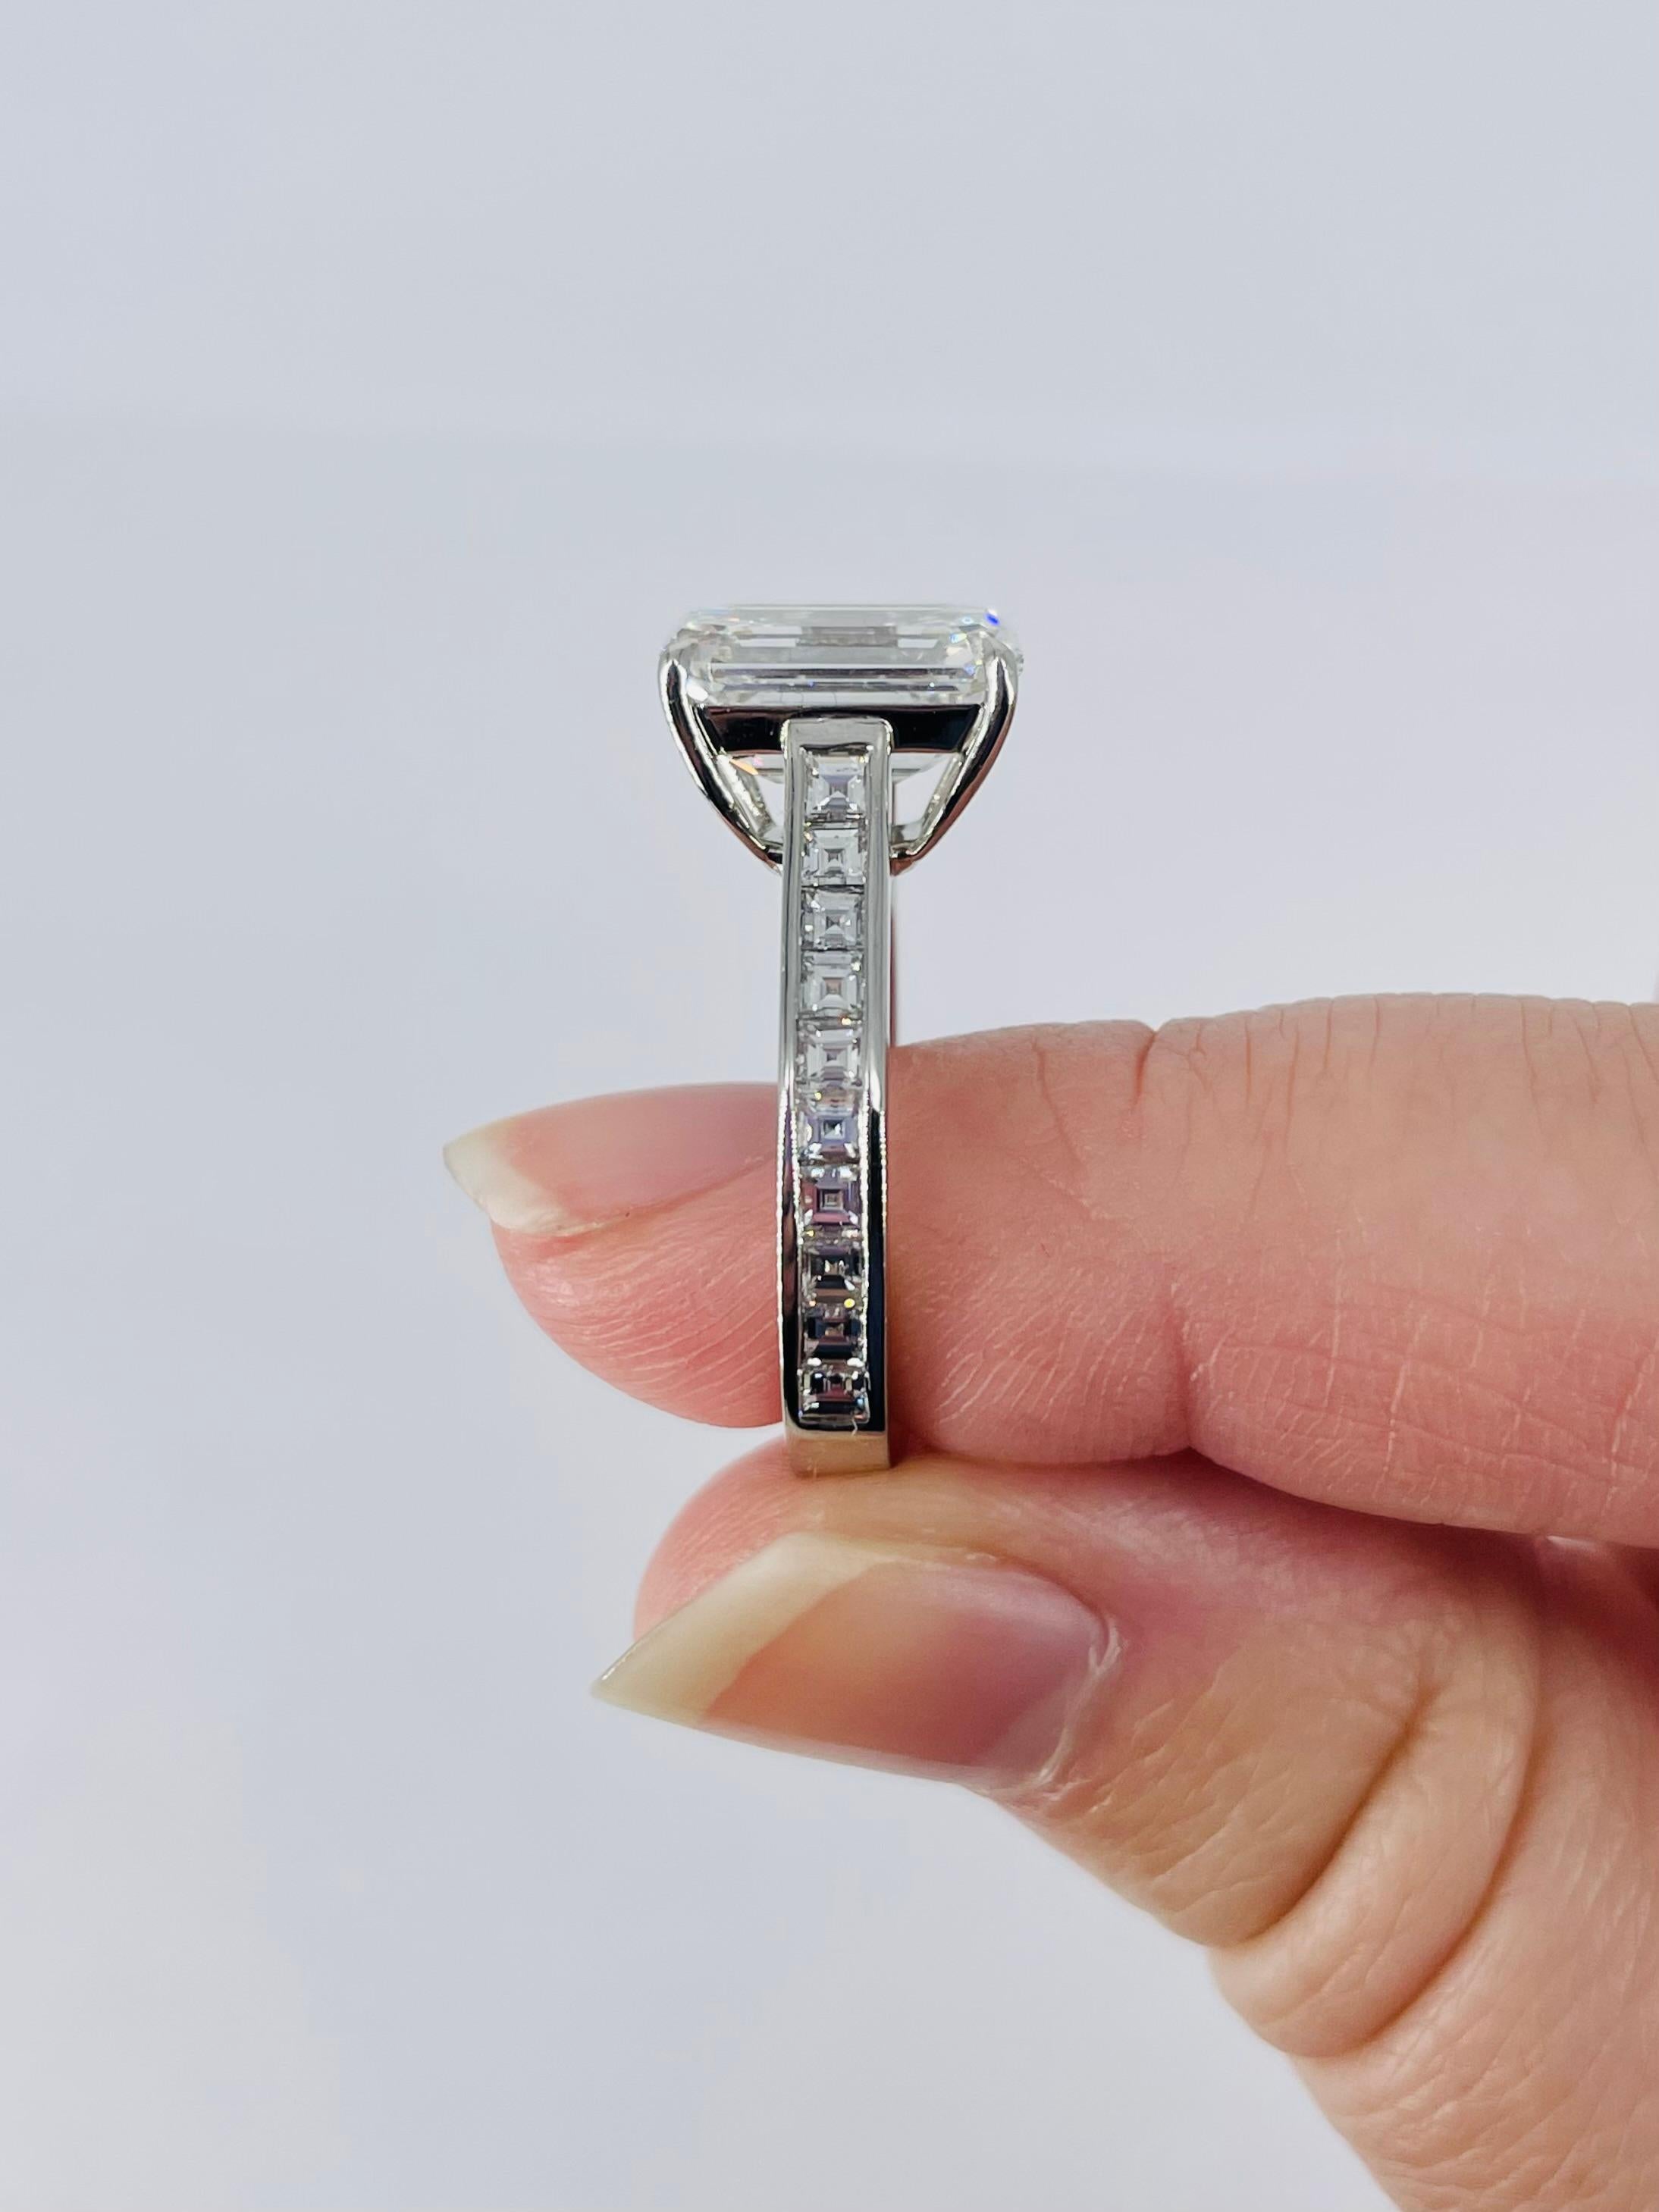 J. Birnbach 4.03 ct GIA GVS1 Emerald Cut Diamond Ring with Carre Diamond Band For Sale 1